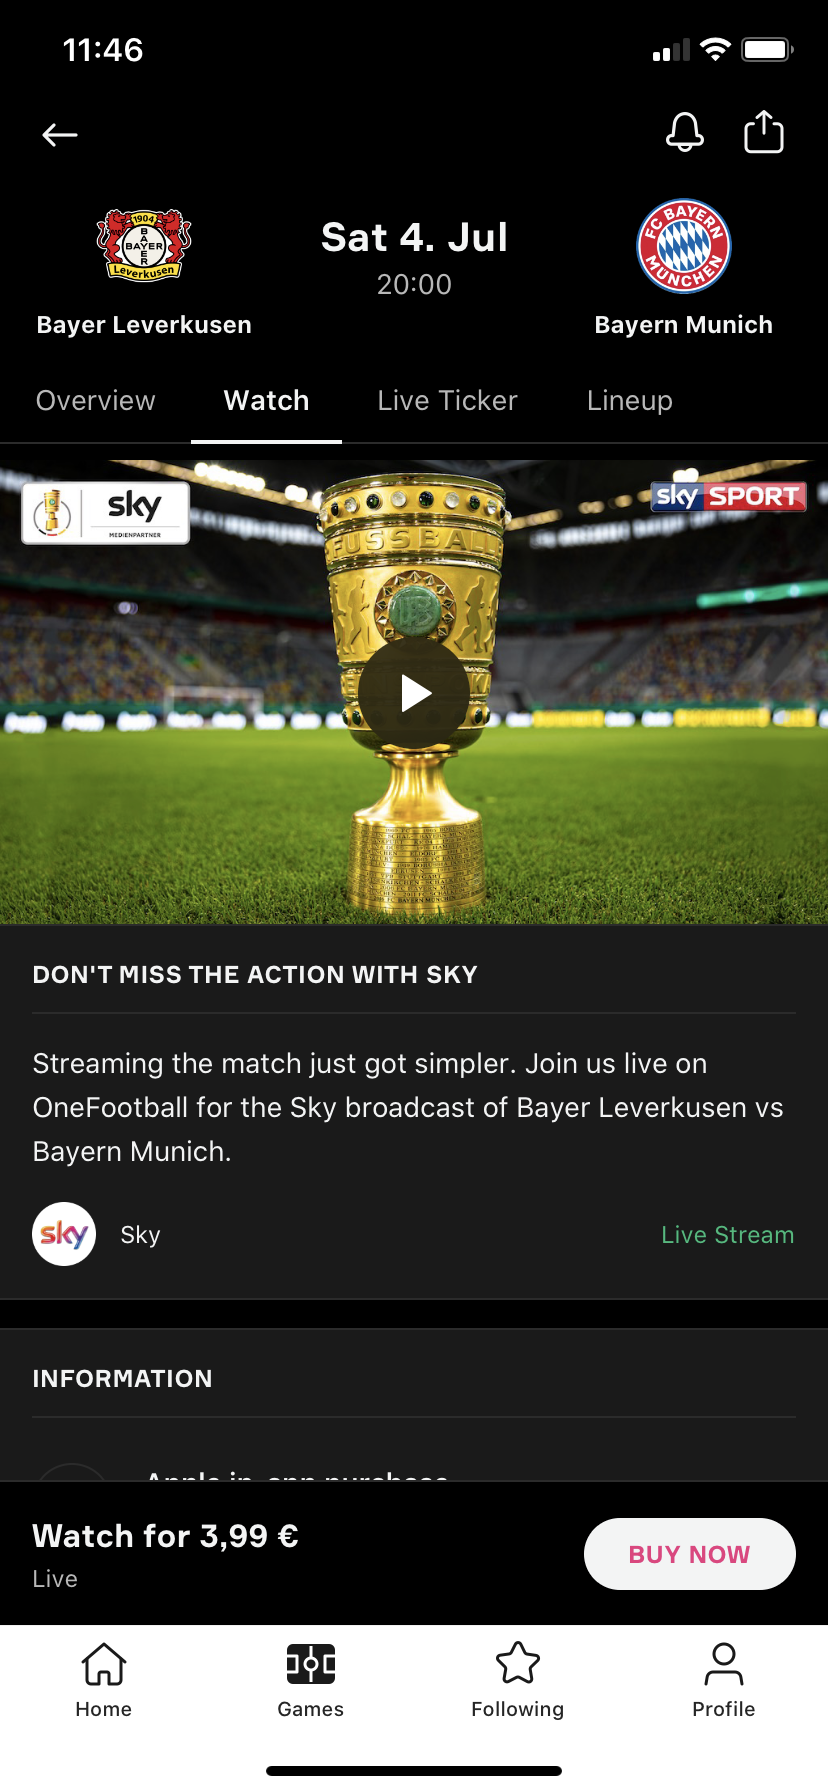 Information about match live streaming in the OneFootball App ...